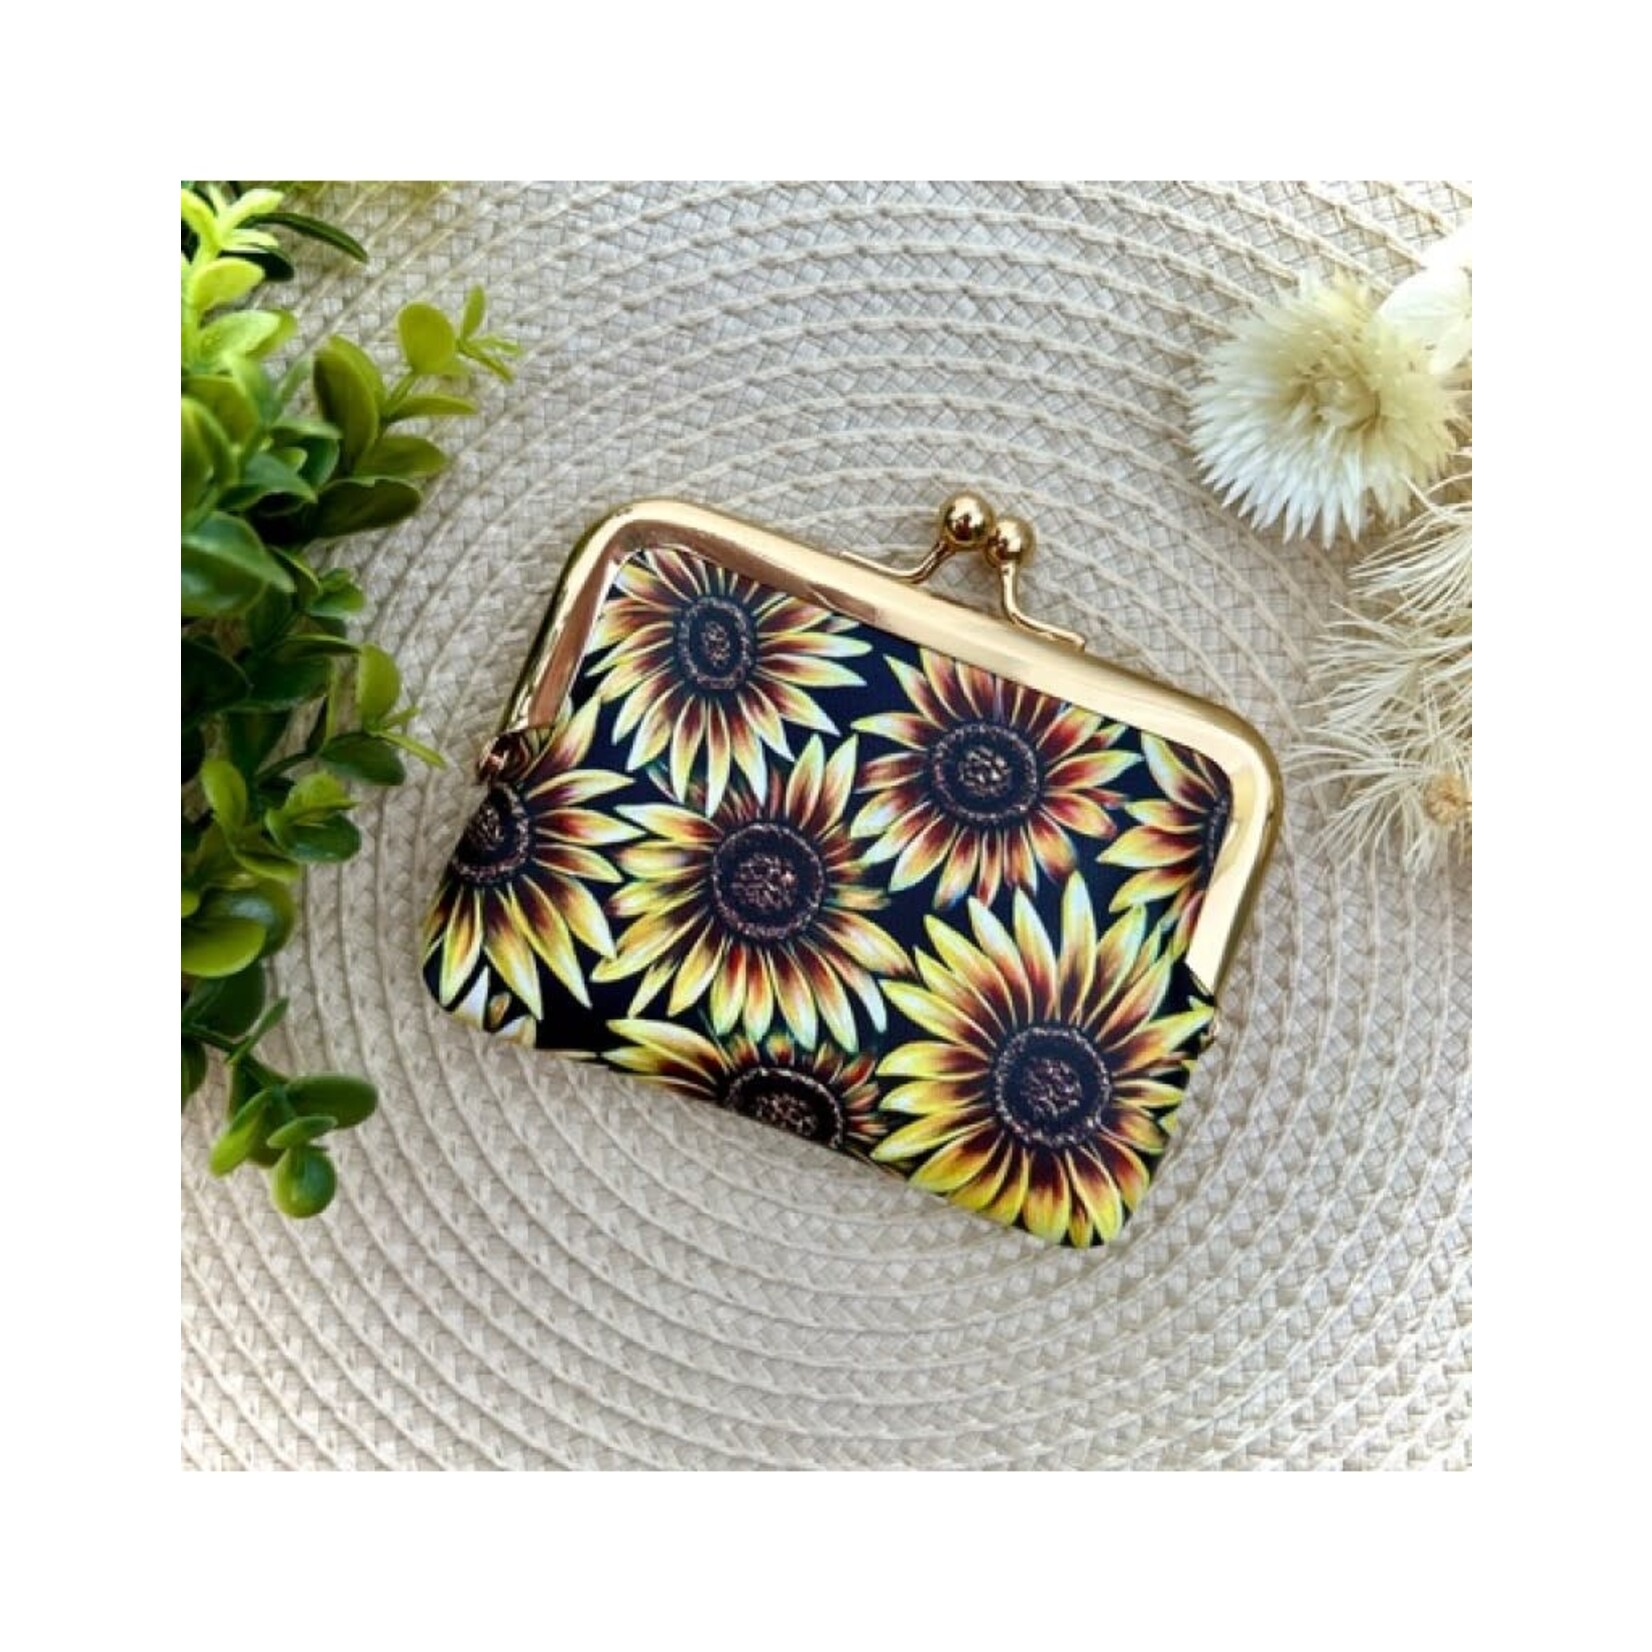 Denise Cassidy Wood Collection Coin Purse - Denise Cassidy Wood Collection